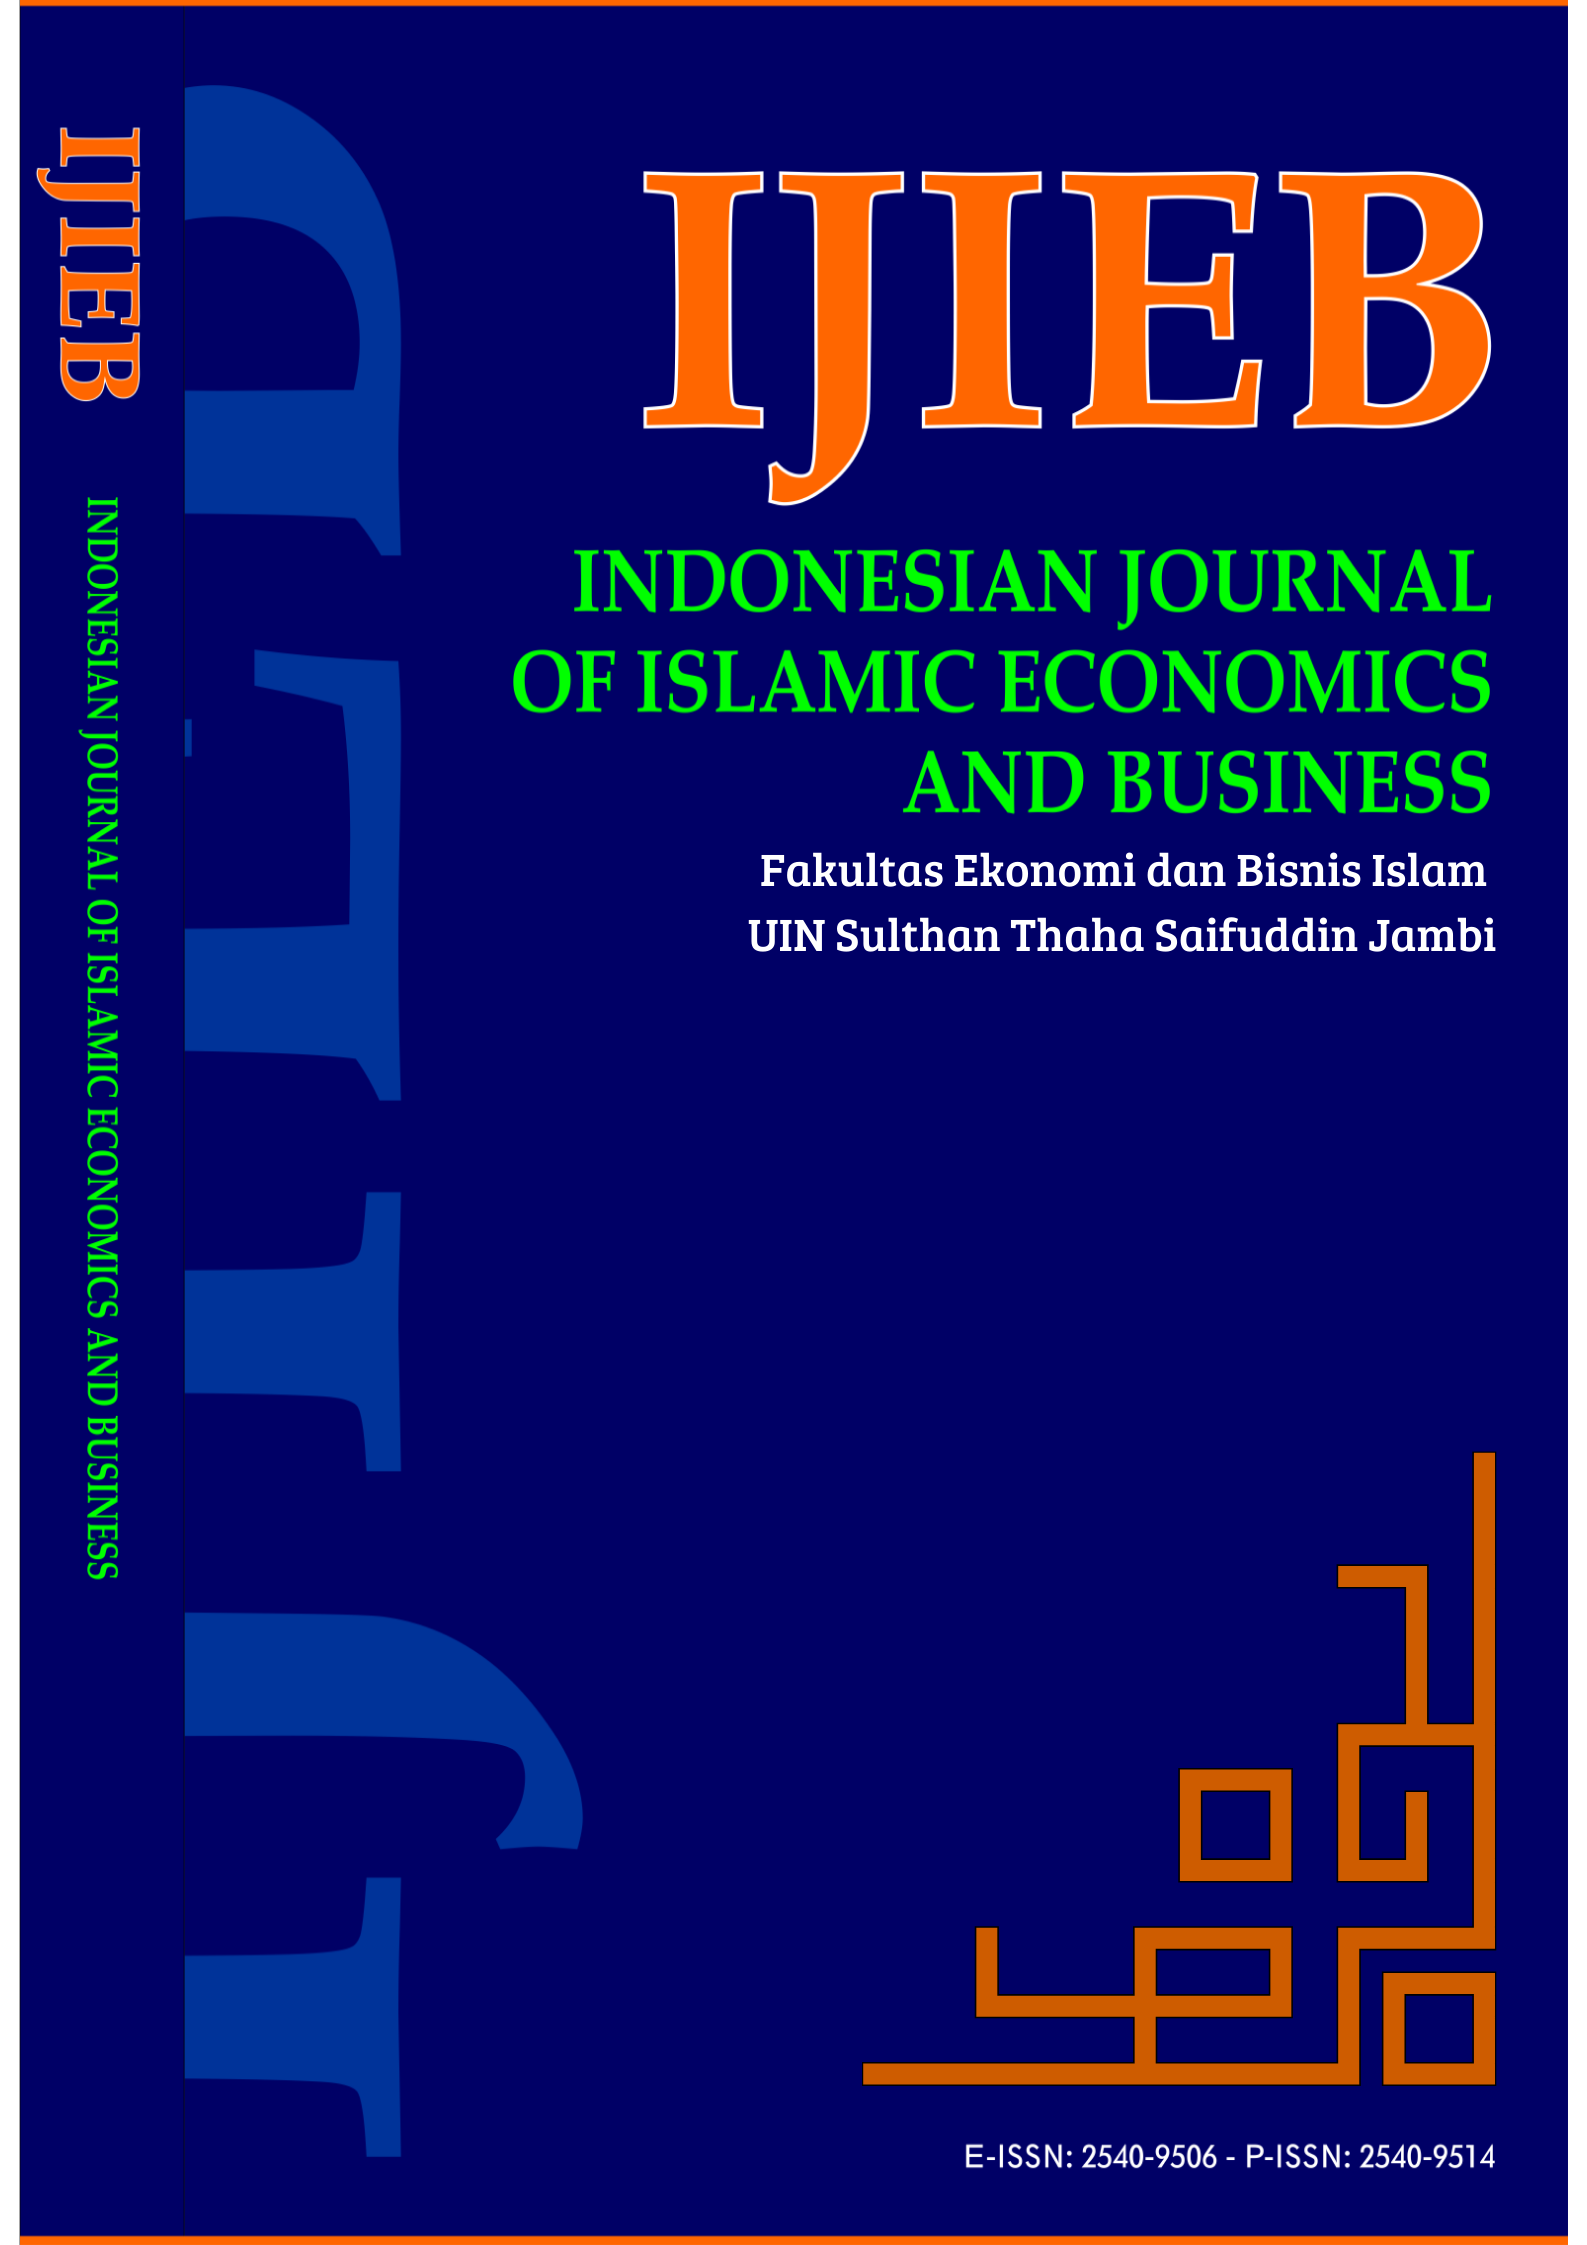 					View Vol. 3 No. 2 (2018): Indonesian Journal of Islamic Economics and Business
				